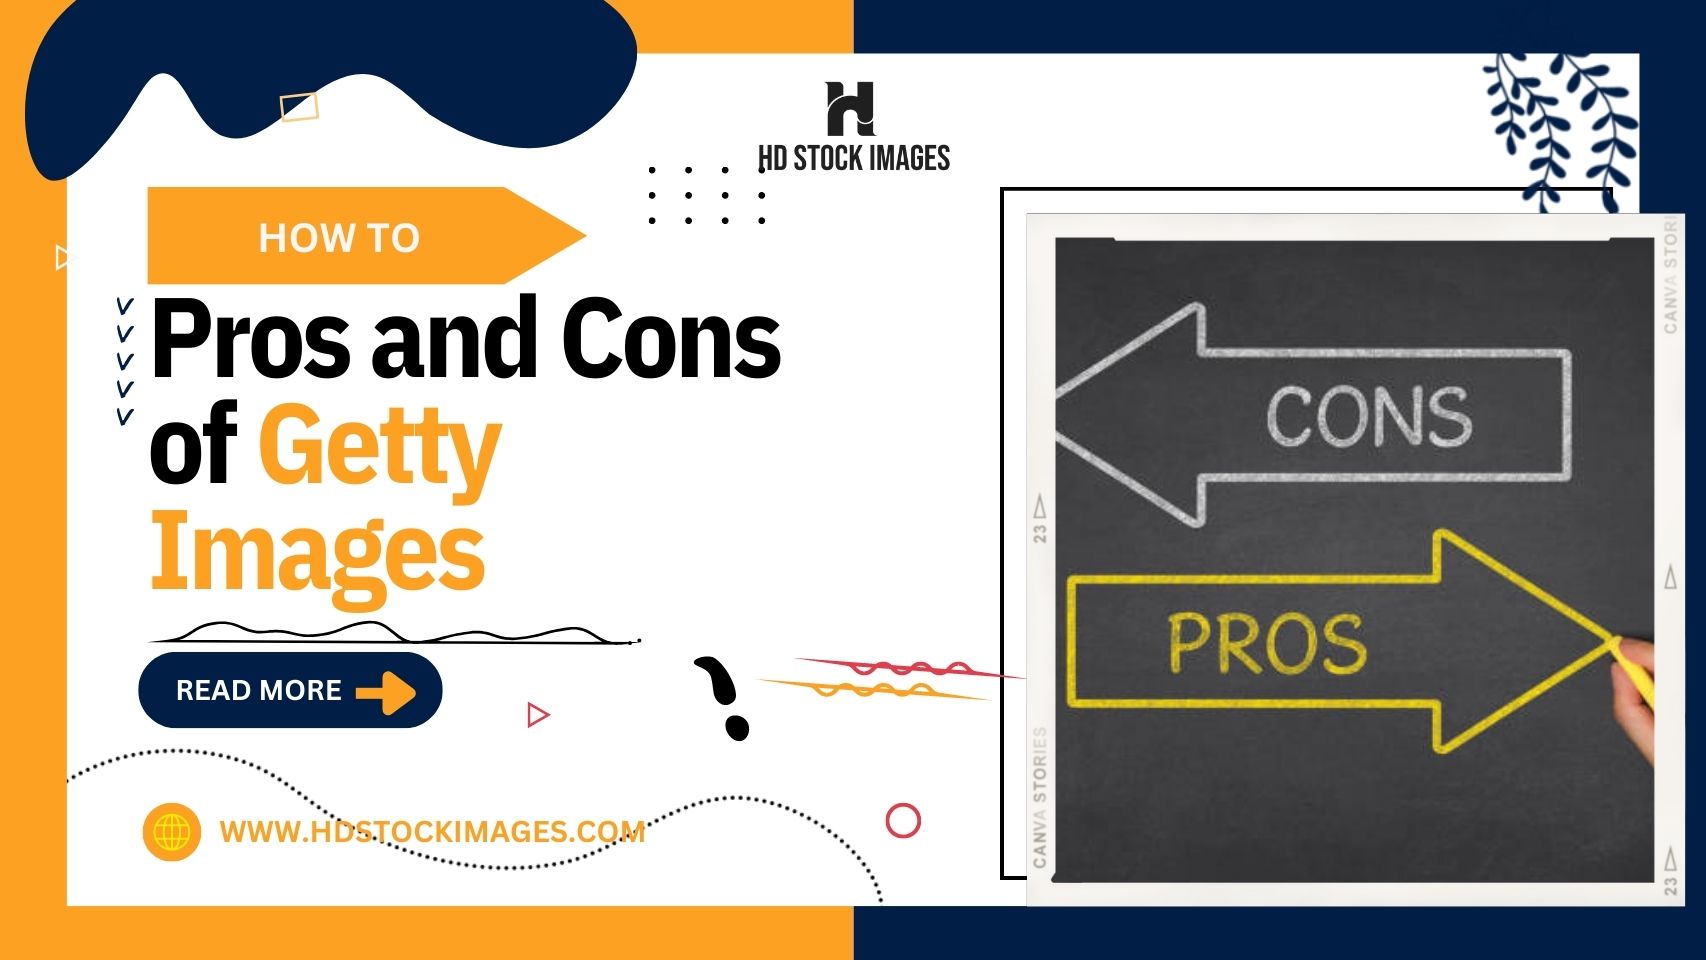 An image of Pros and Cons of Getty Images